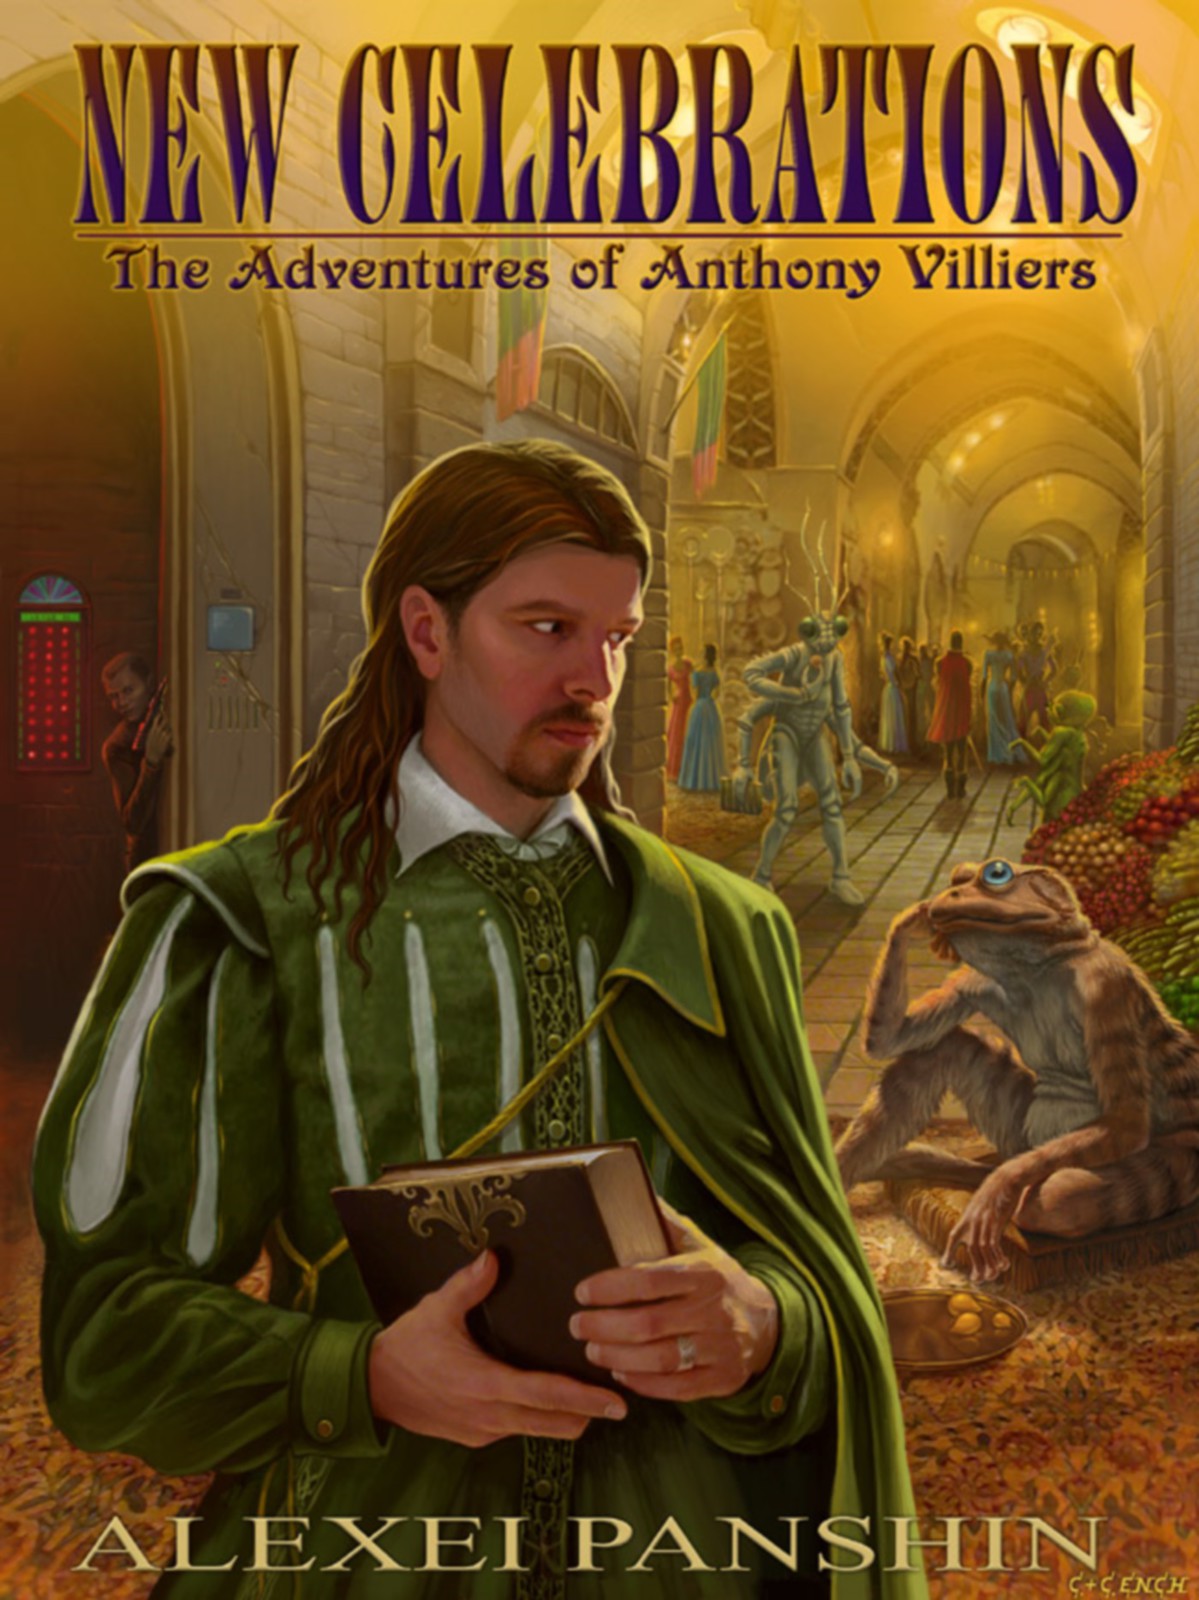 New Celebrations: The Adventures of Anthony Villiers by Alexei Panshin